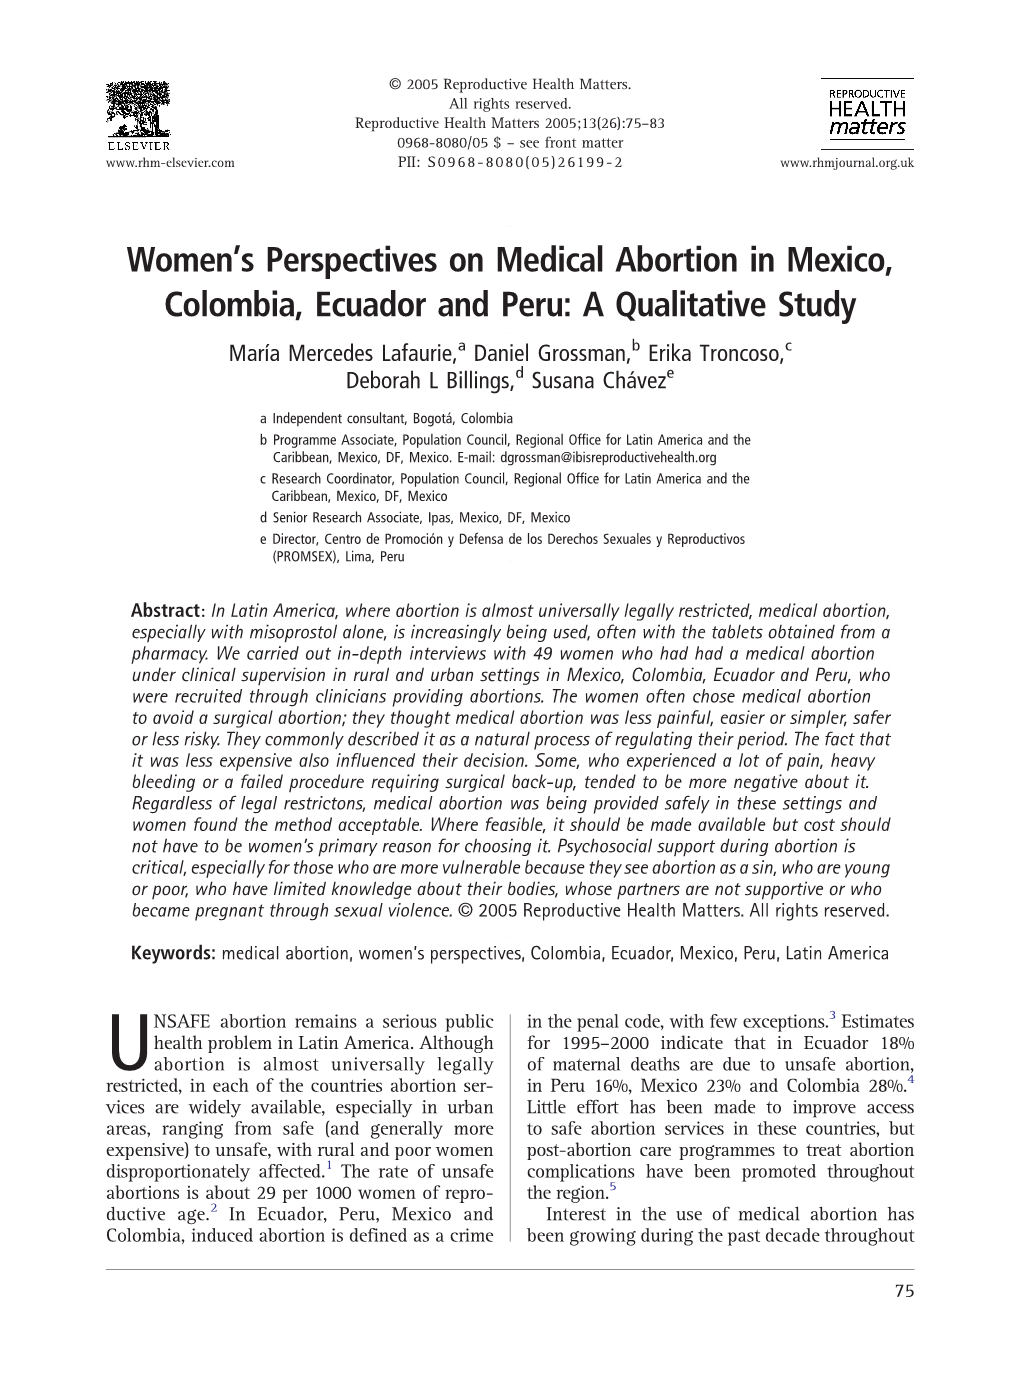 Women's Perspectives on Medical Abortion In